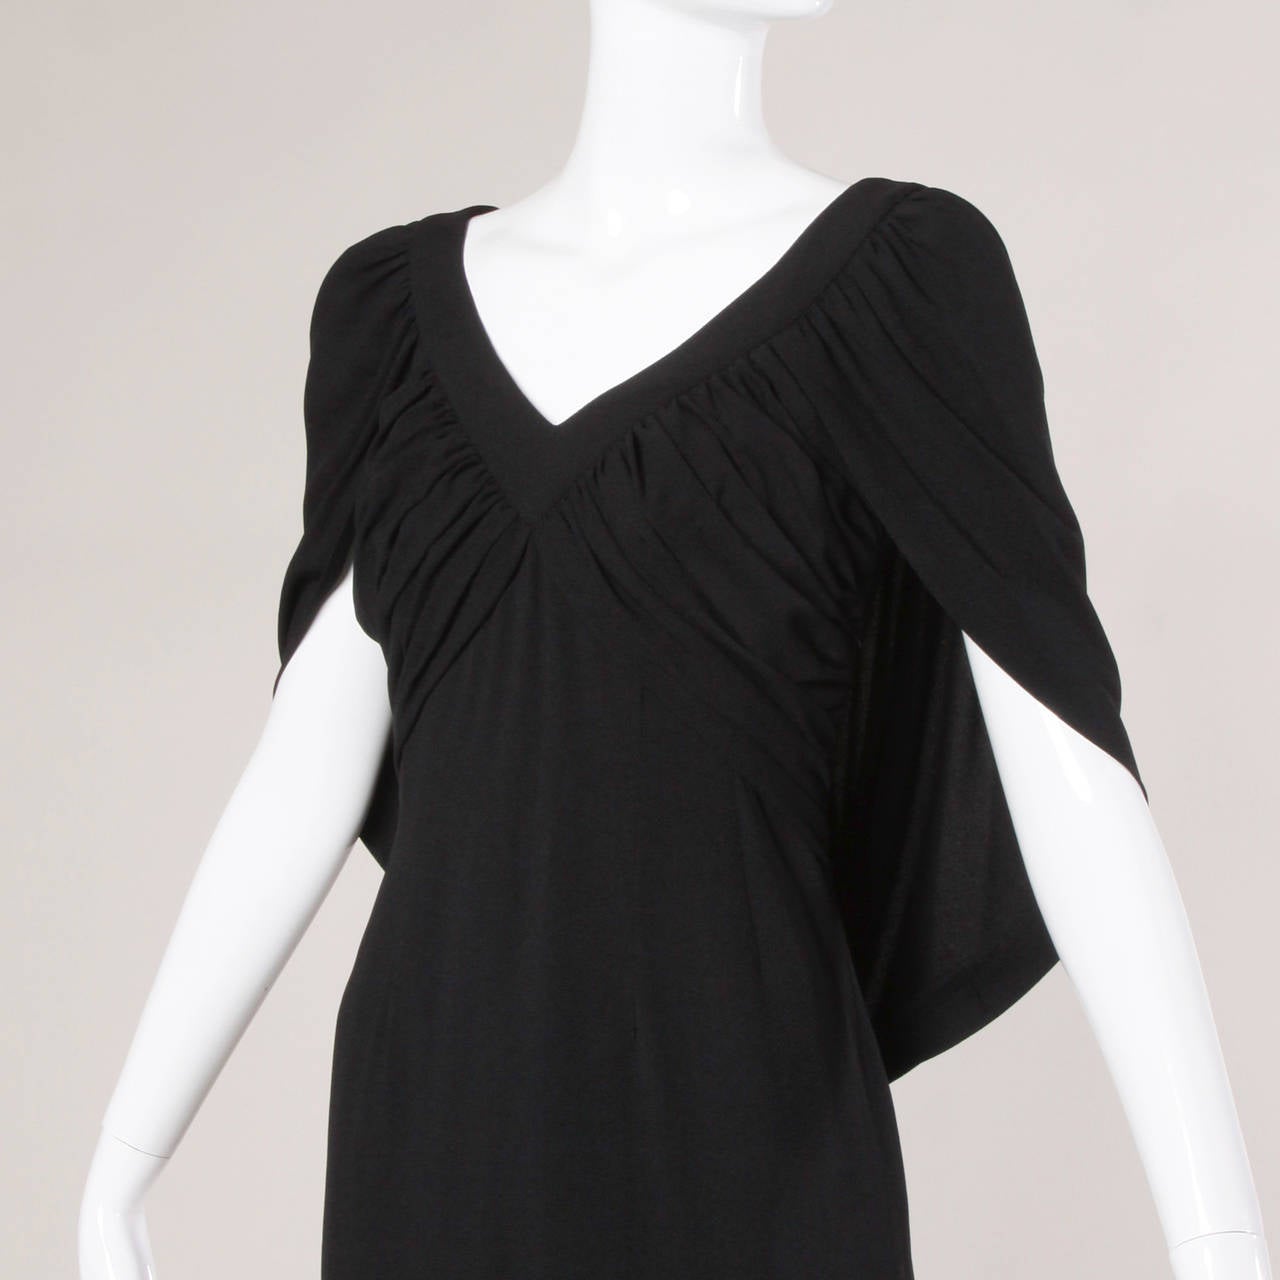 Vintage black crepe dress dress by couture designer Don Loper. Unique ruched empire waist with attached cocoon shaped cape attached.

Details:

Partially Lined
Back Metal Zip and Hook Closure
Marked Size: Not Marked
Estimated Size: